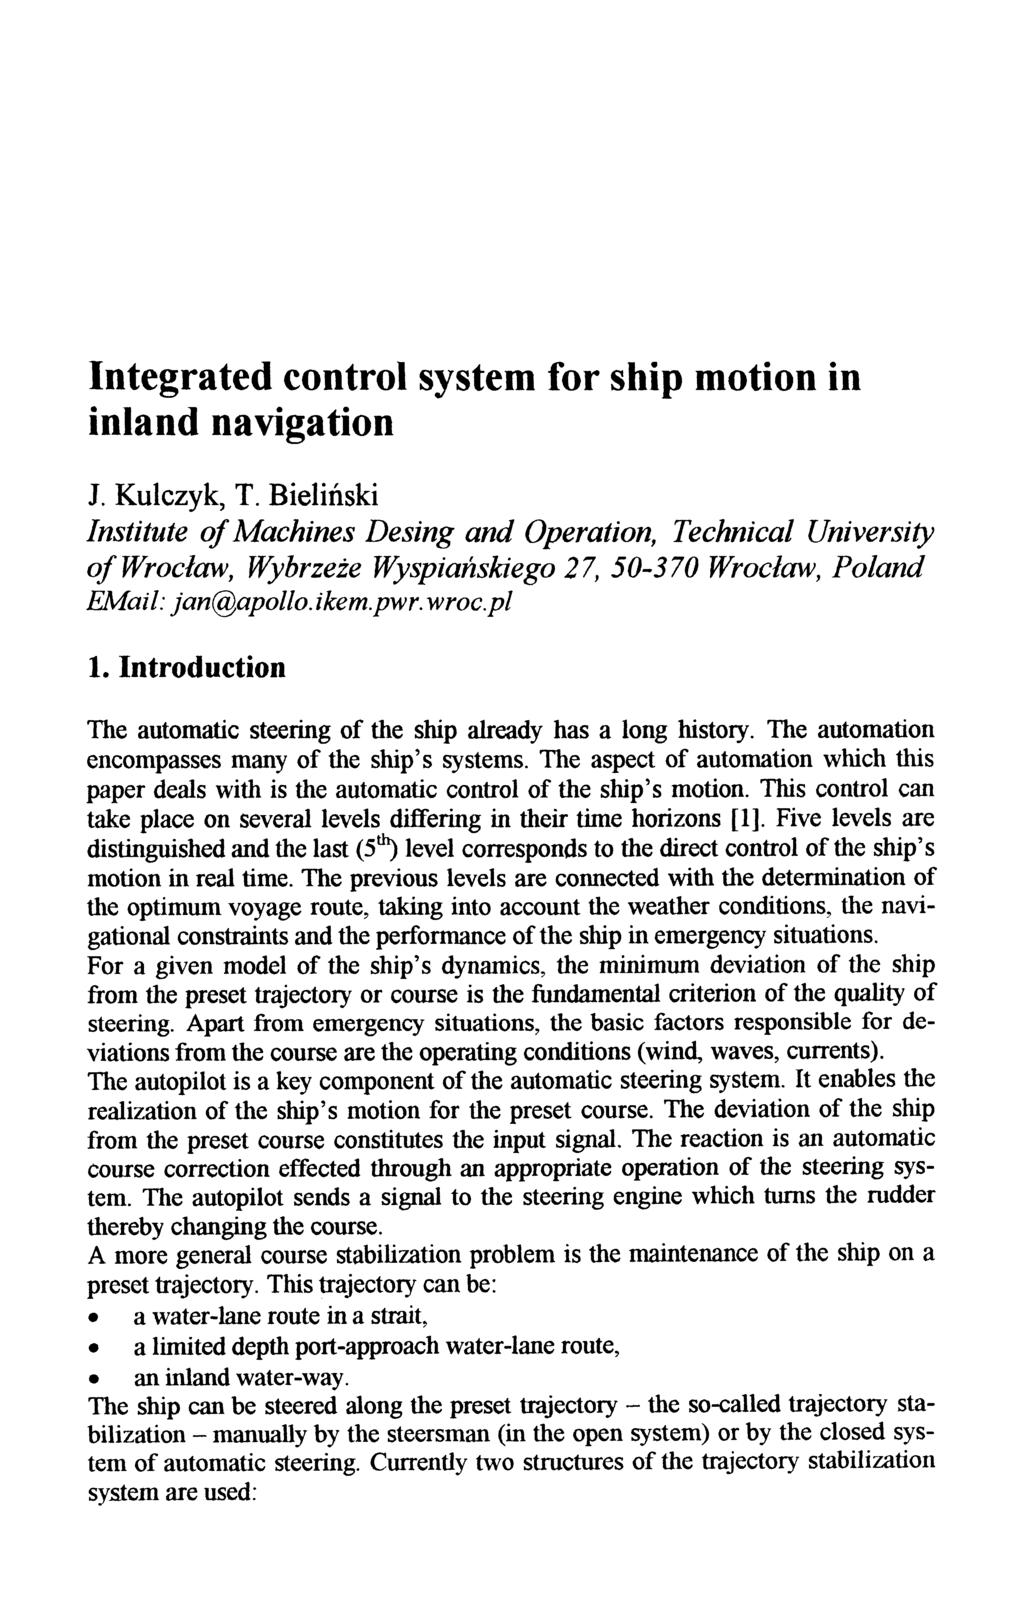 Integrated control system for ship motion in inland navigation J. Kulczyk, T.